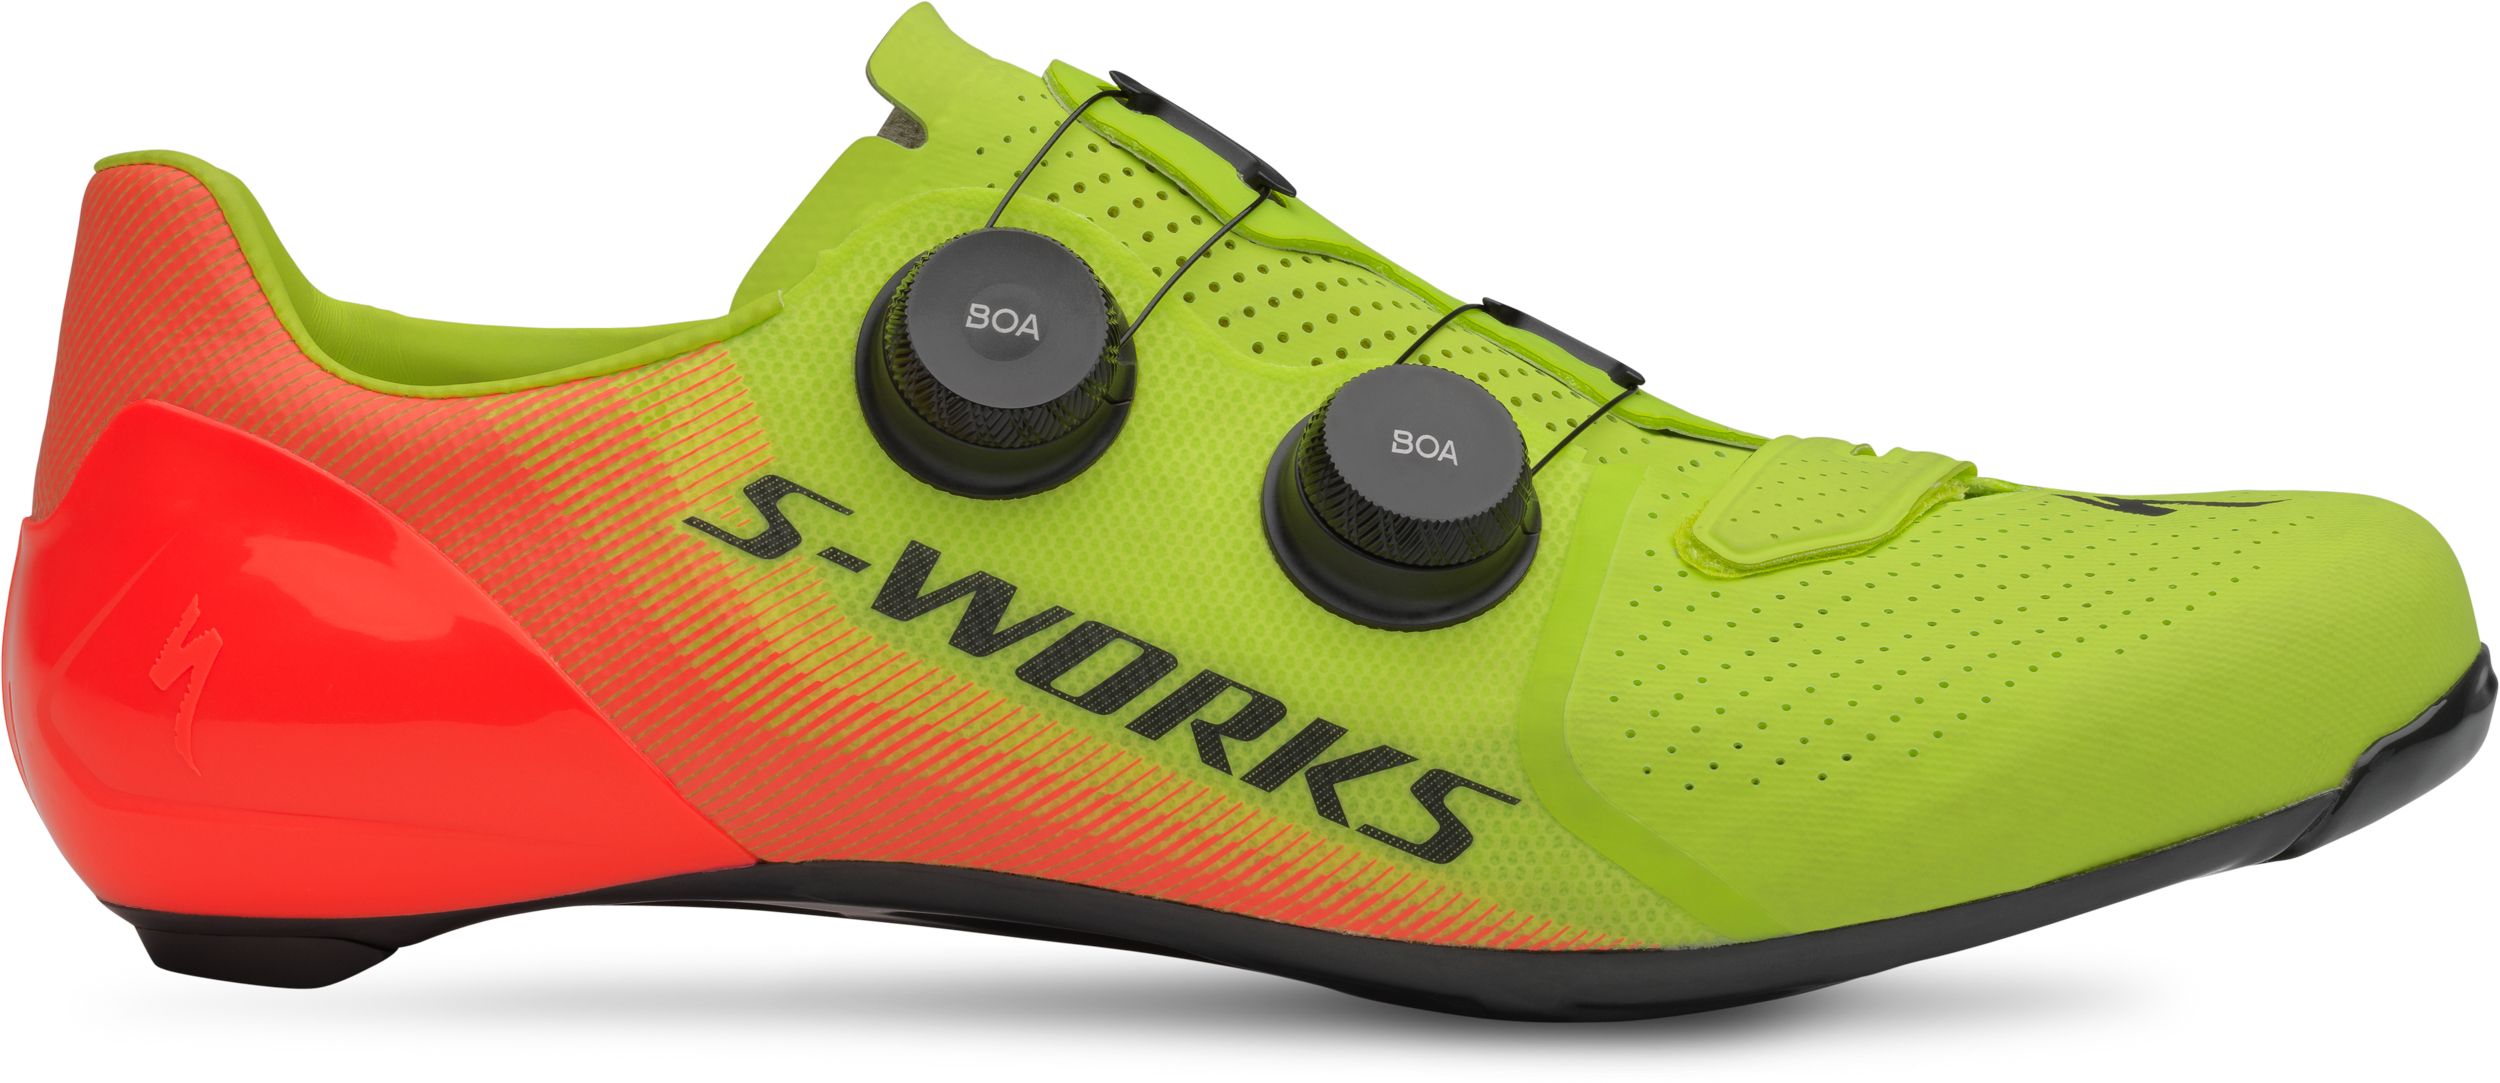 s works 7 mtb shoes